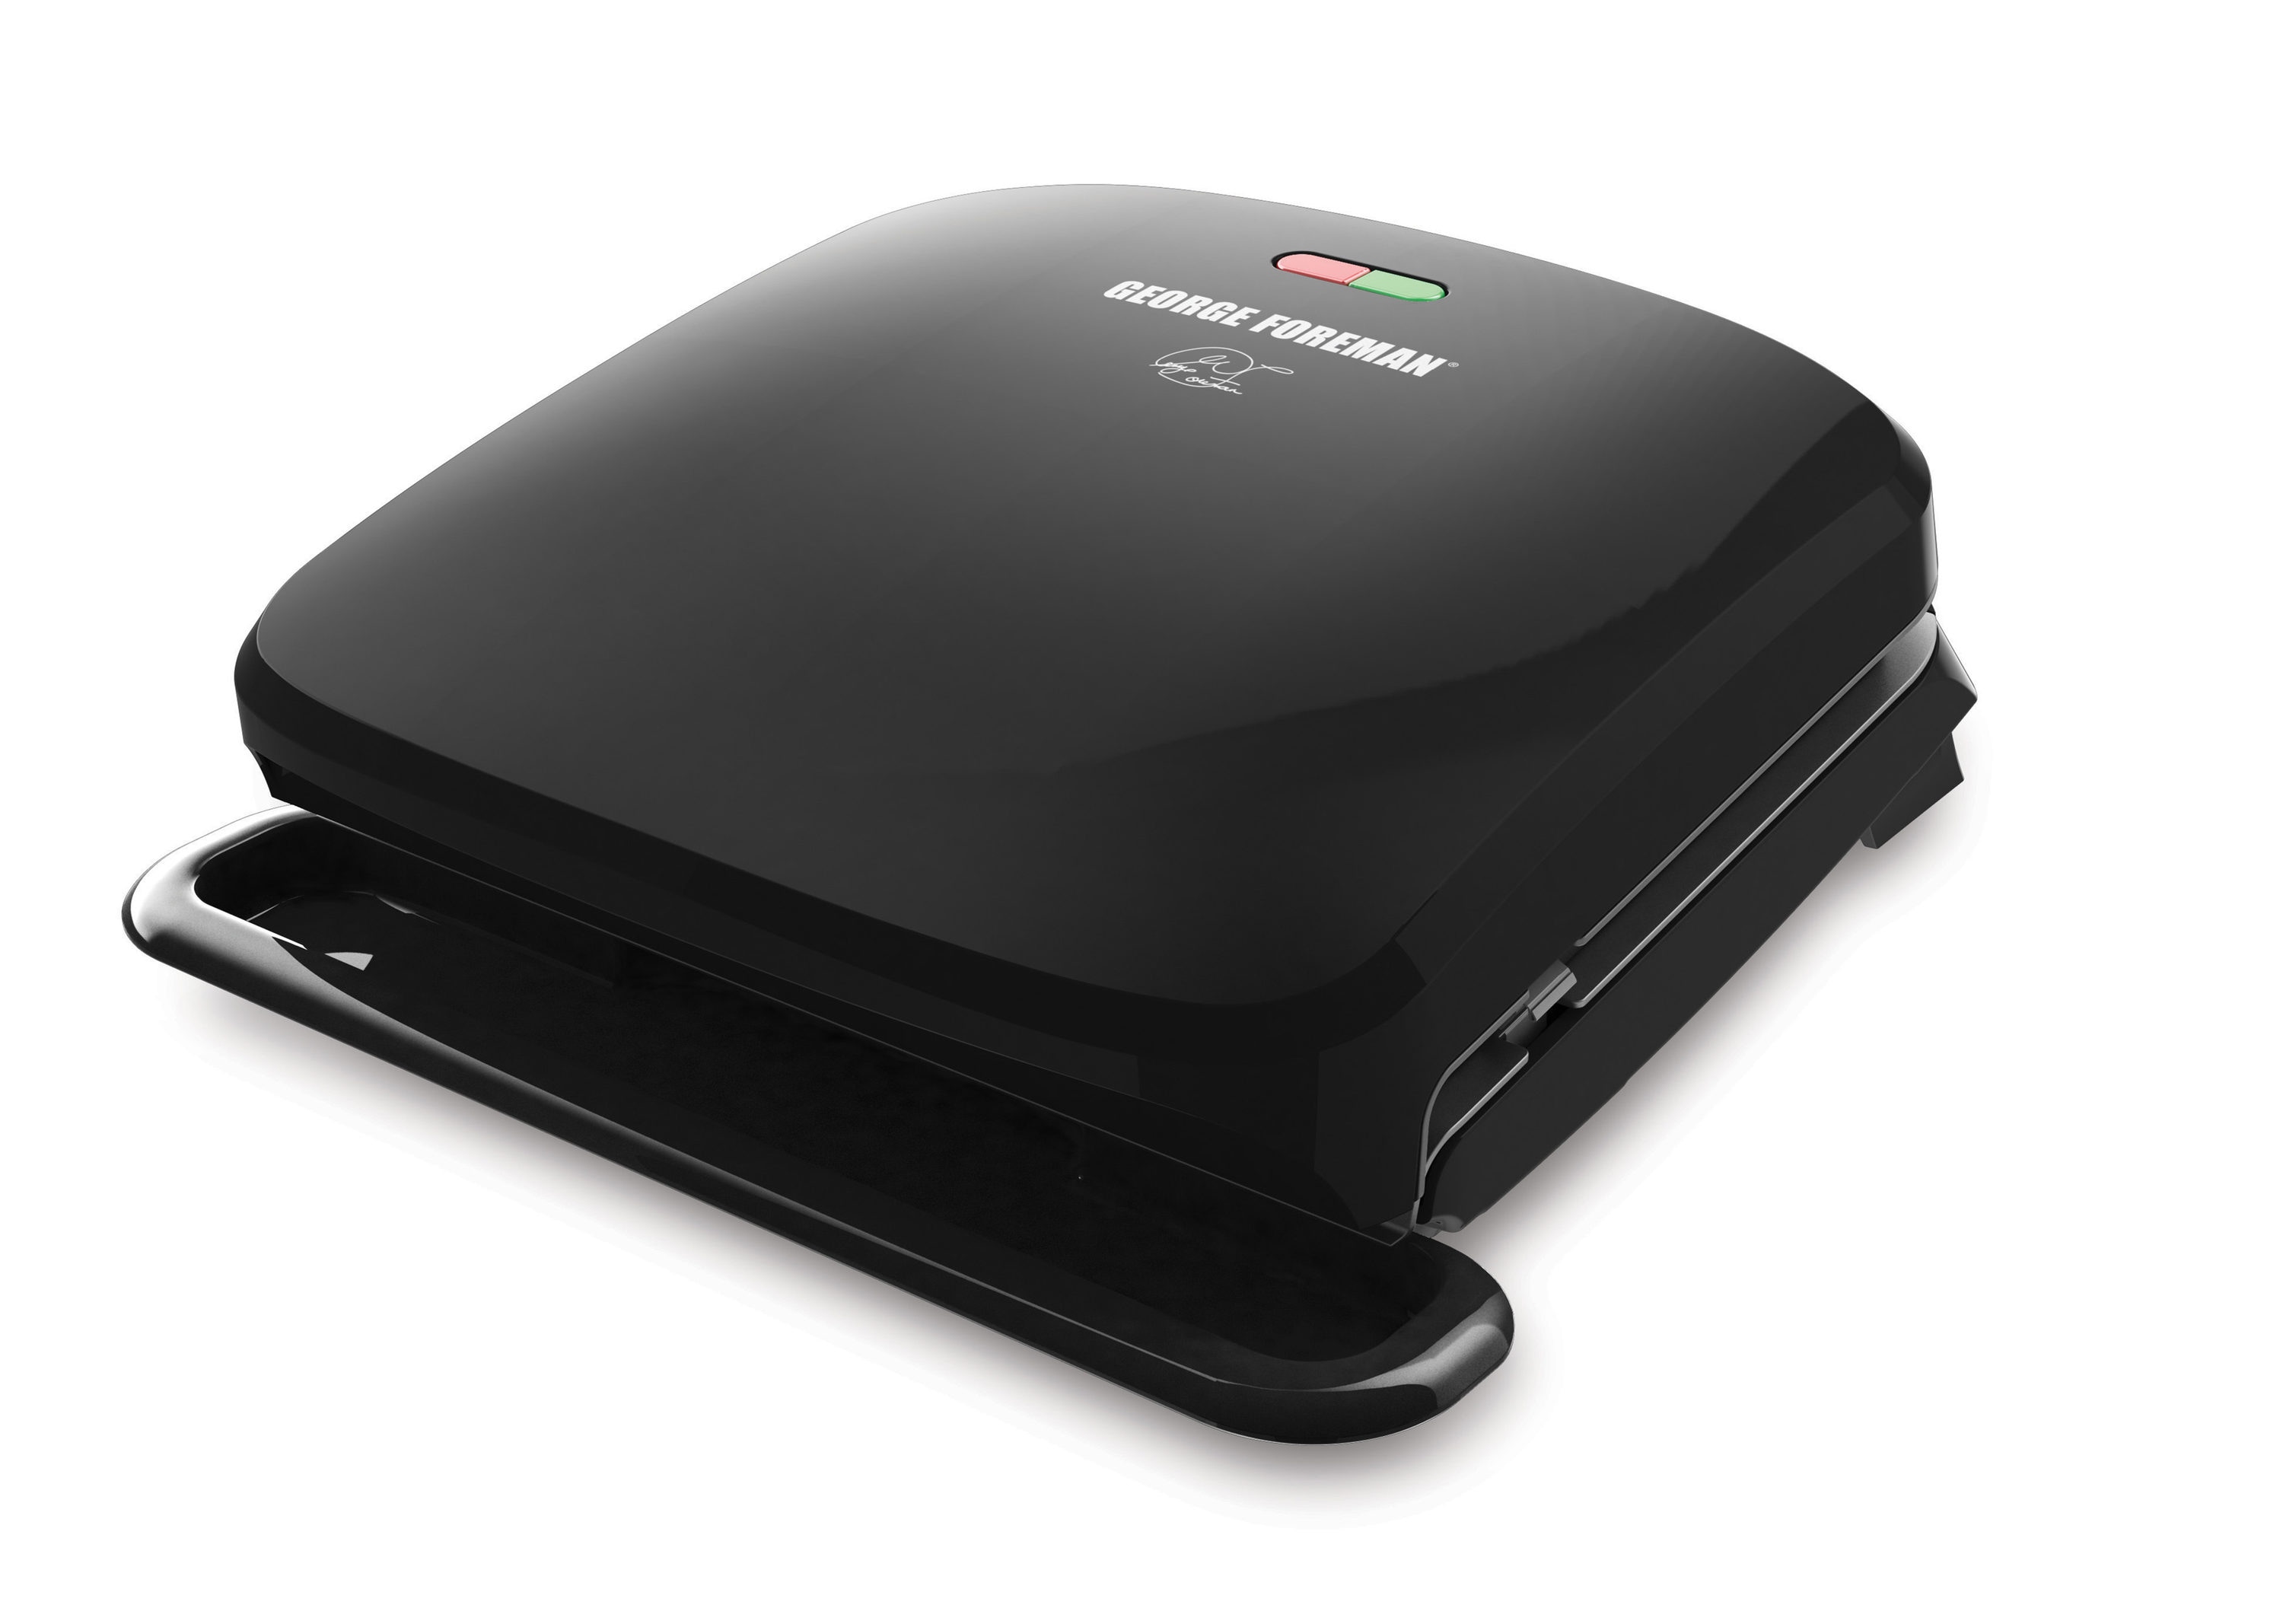 George Foreman 9.2-in L x 6.69-in W Non-Stick Residential in the